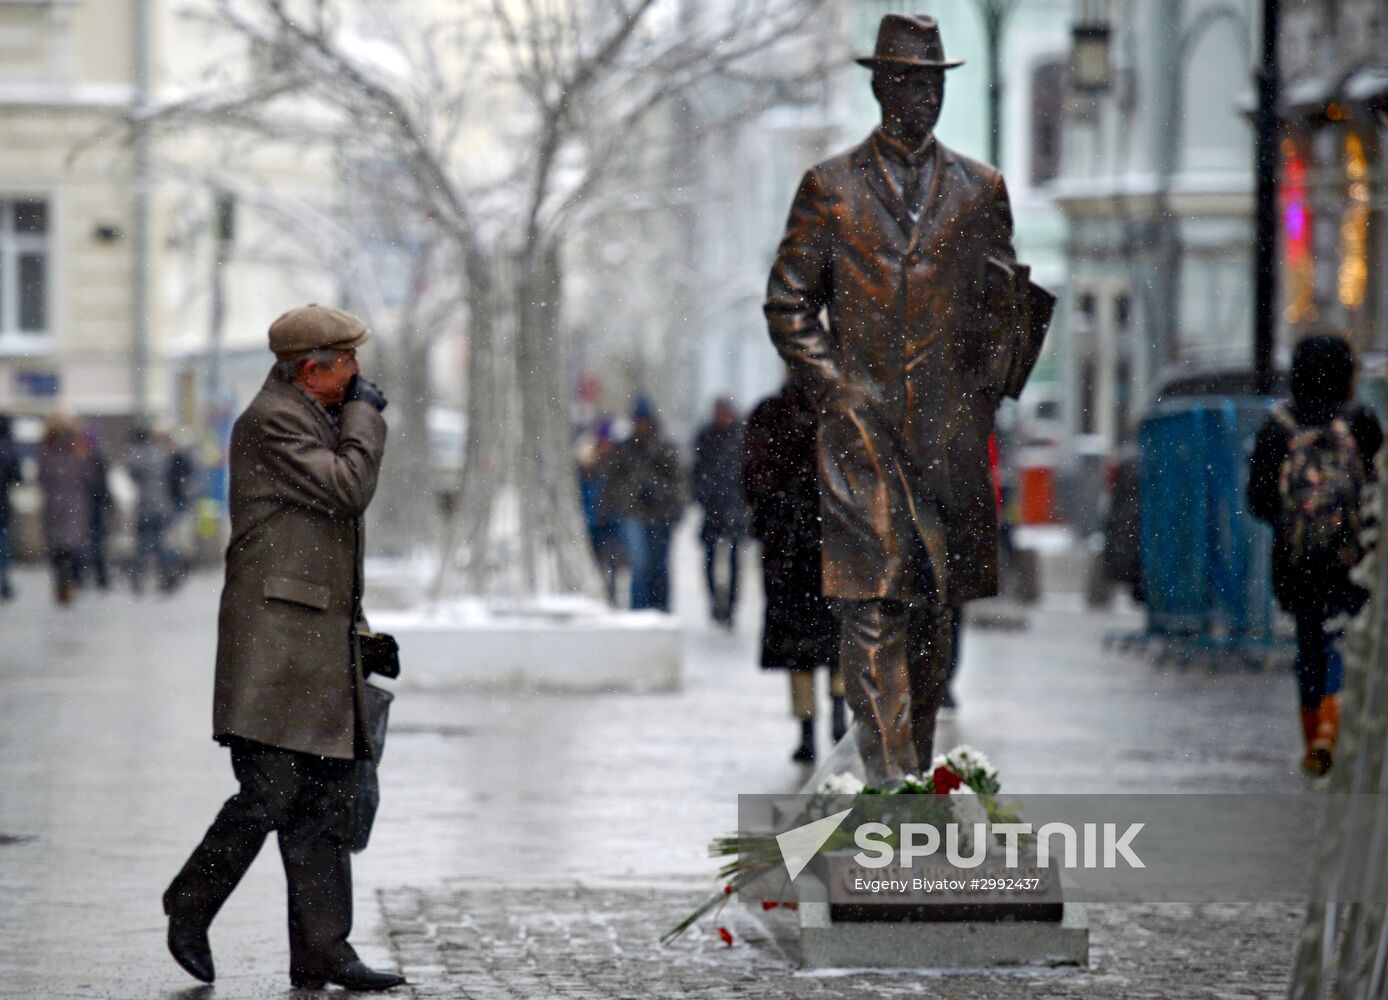 Monument to Sergei Prokofiev opened in Moscow